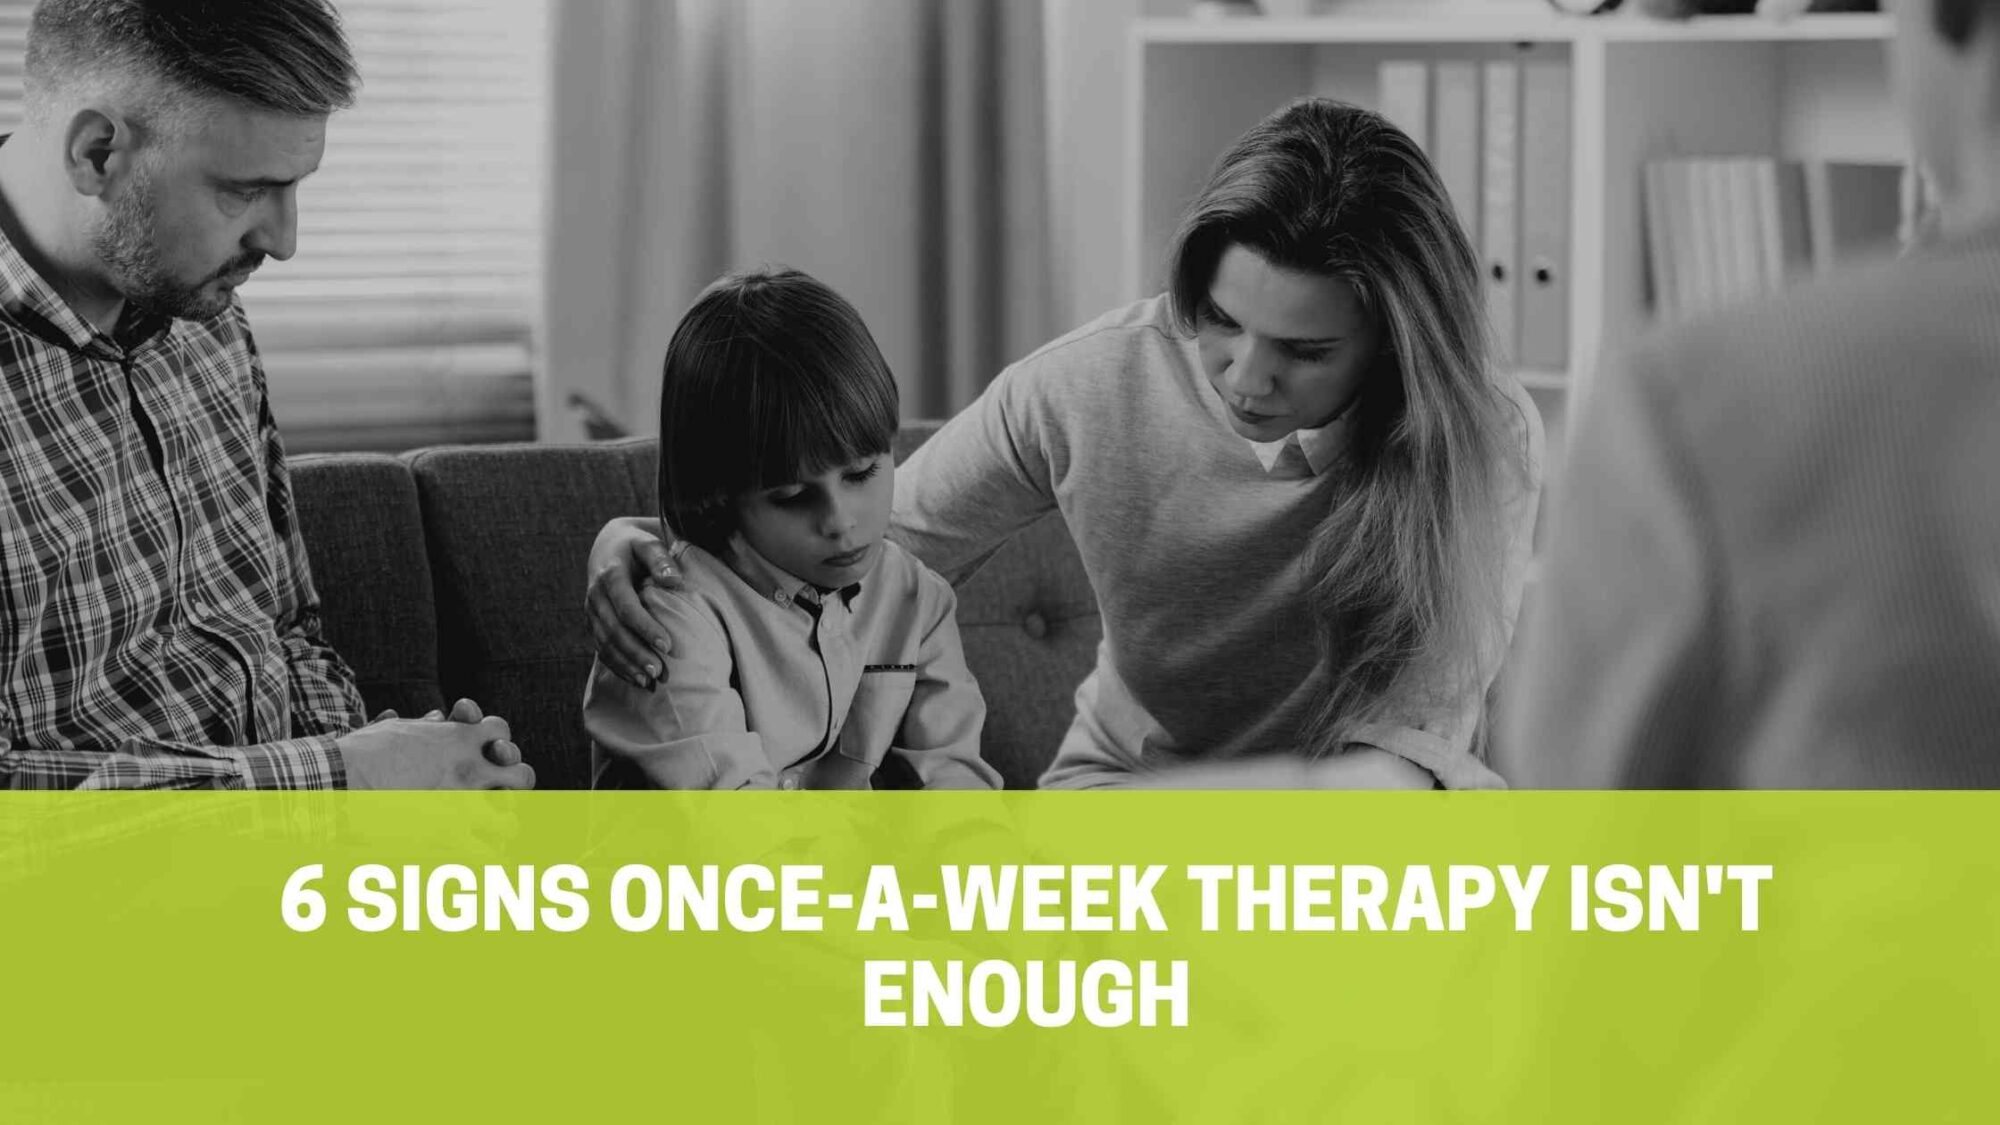 Mother and father sit on sofa with arm around son across from therapist above title in white text over green with words, "Signs weekly therapy isn't enough"